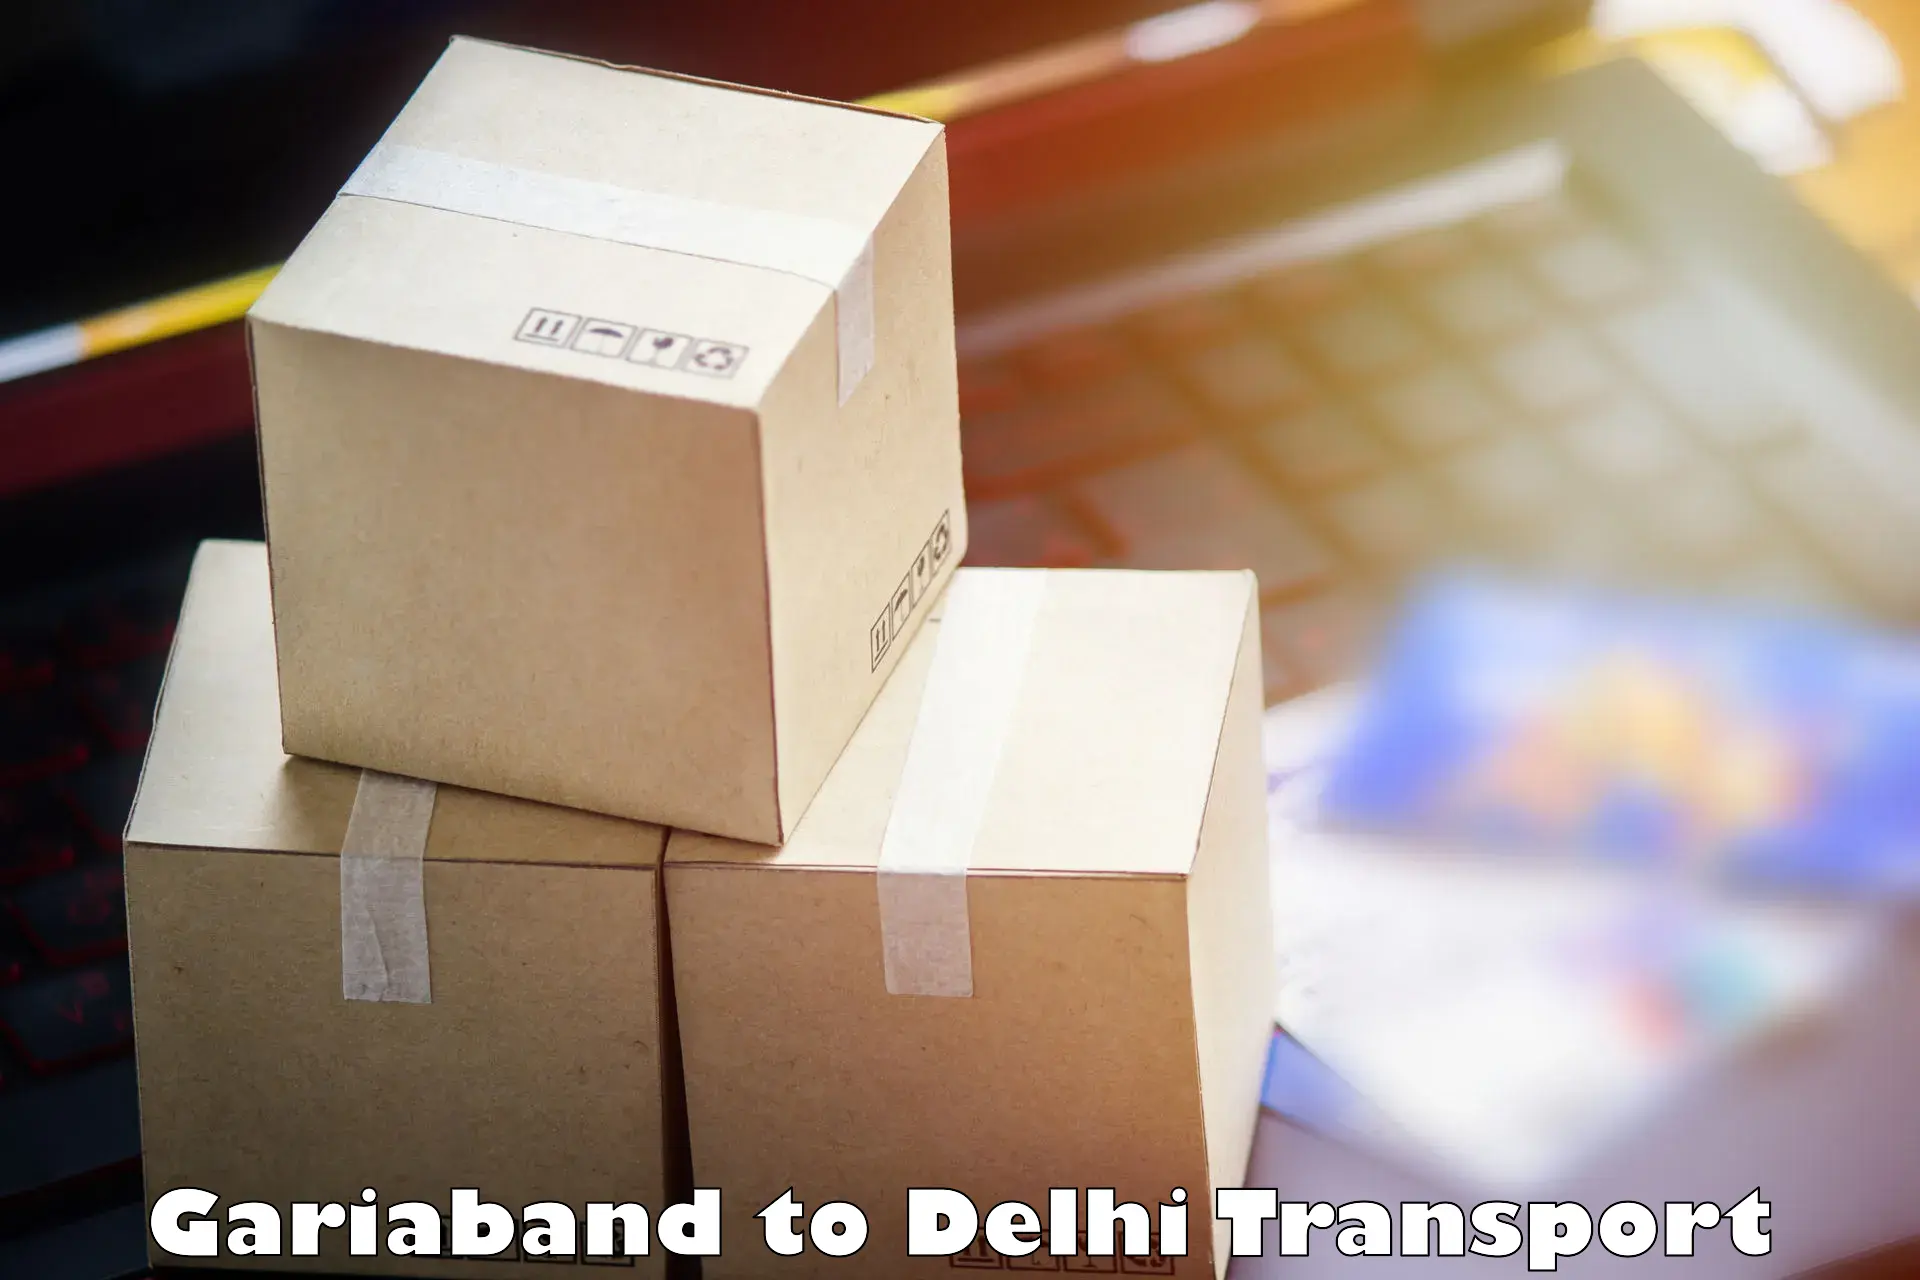 Goods delivery service Gariaband to Delhi